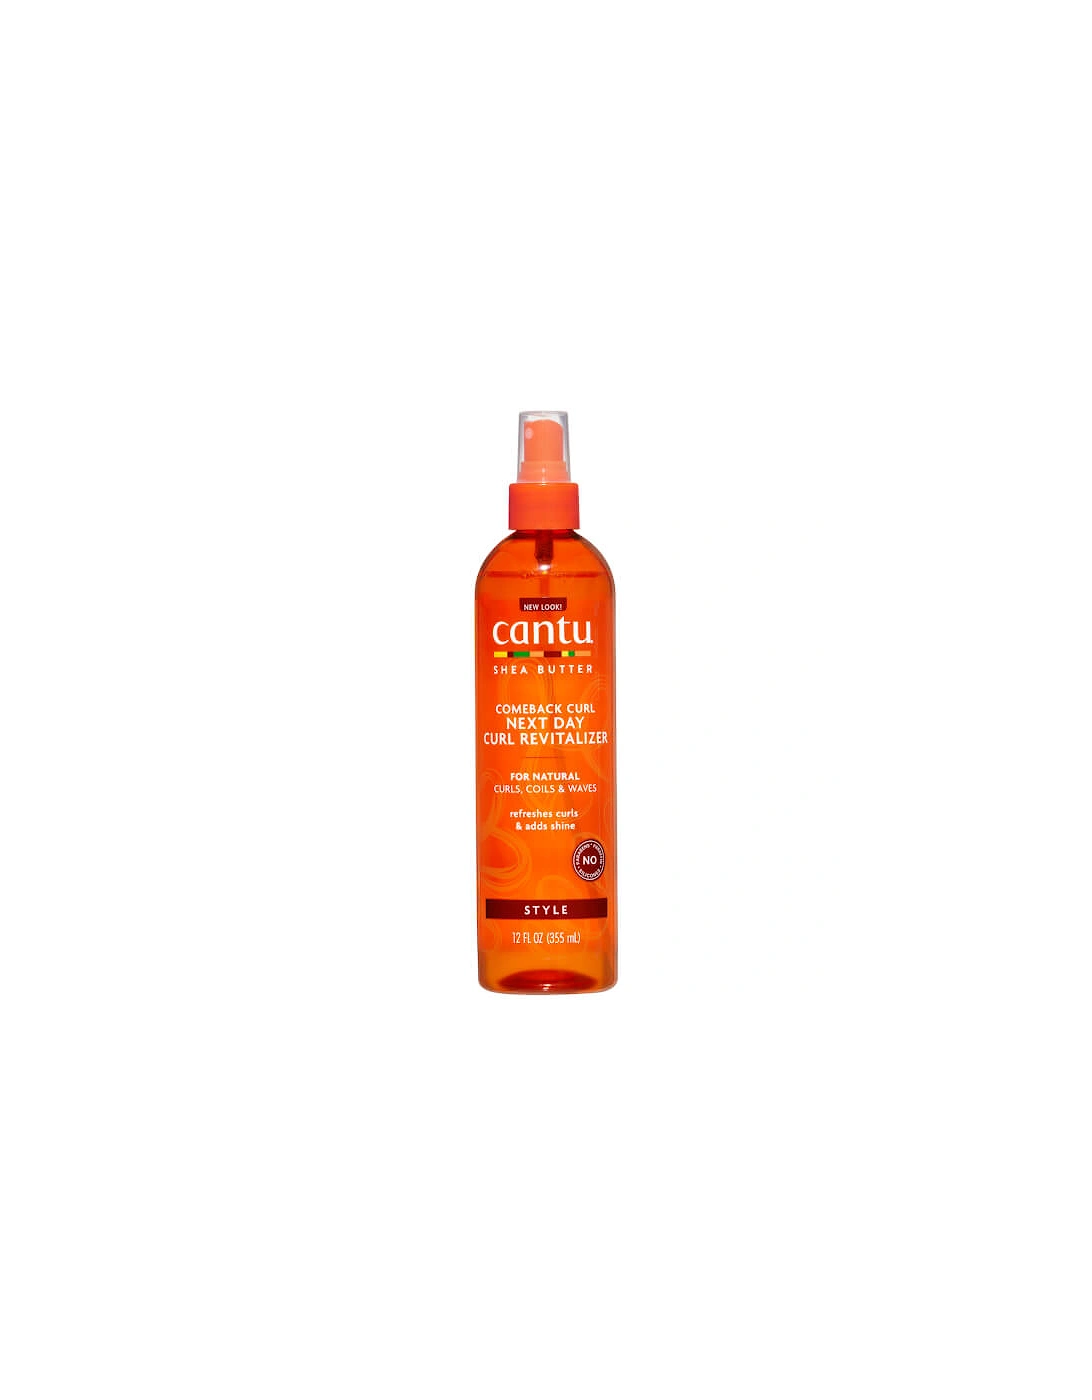 Shea Butter for Natural Hair Comeback Curl Next Day Curl Revitalizer 355ml, 2 of 1